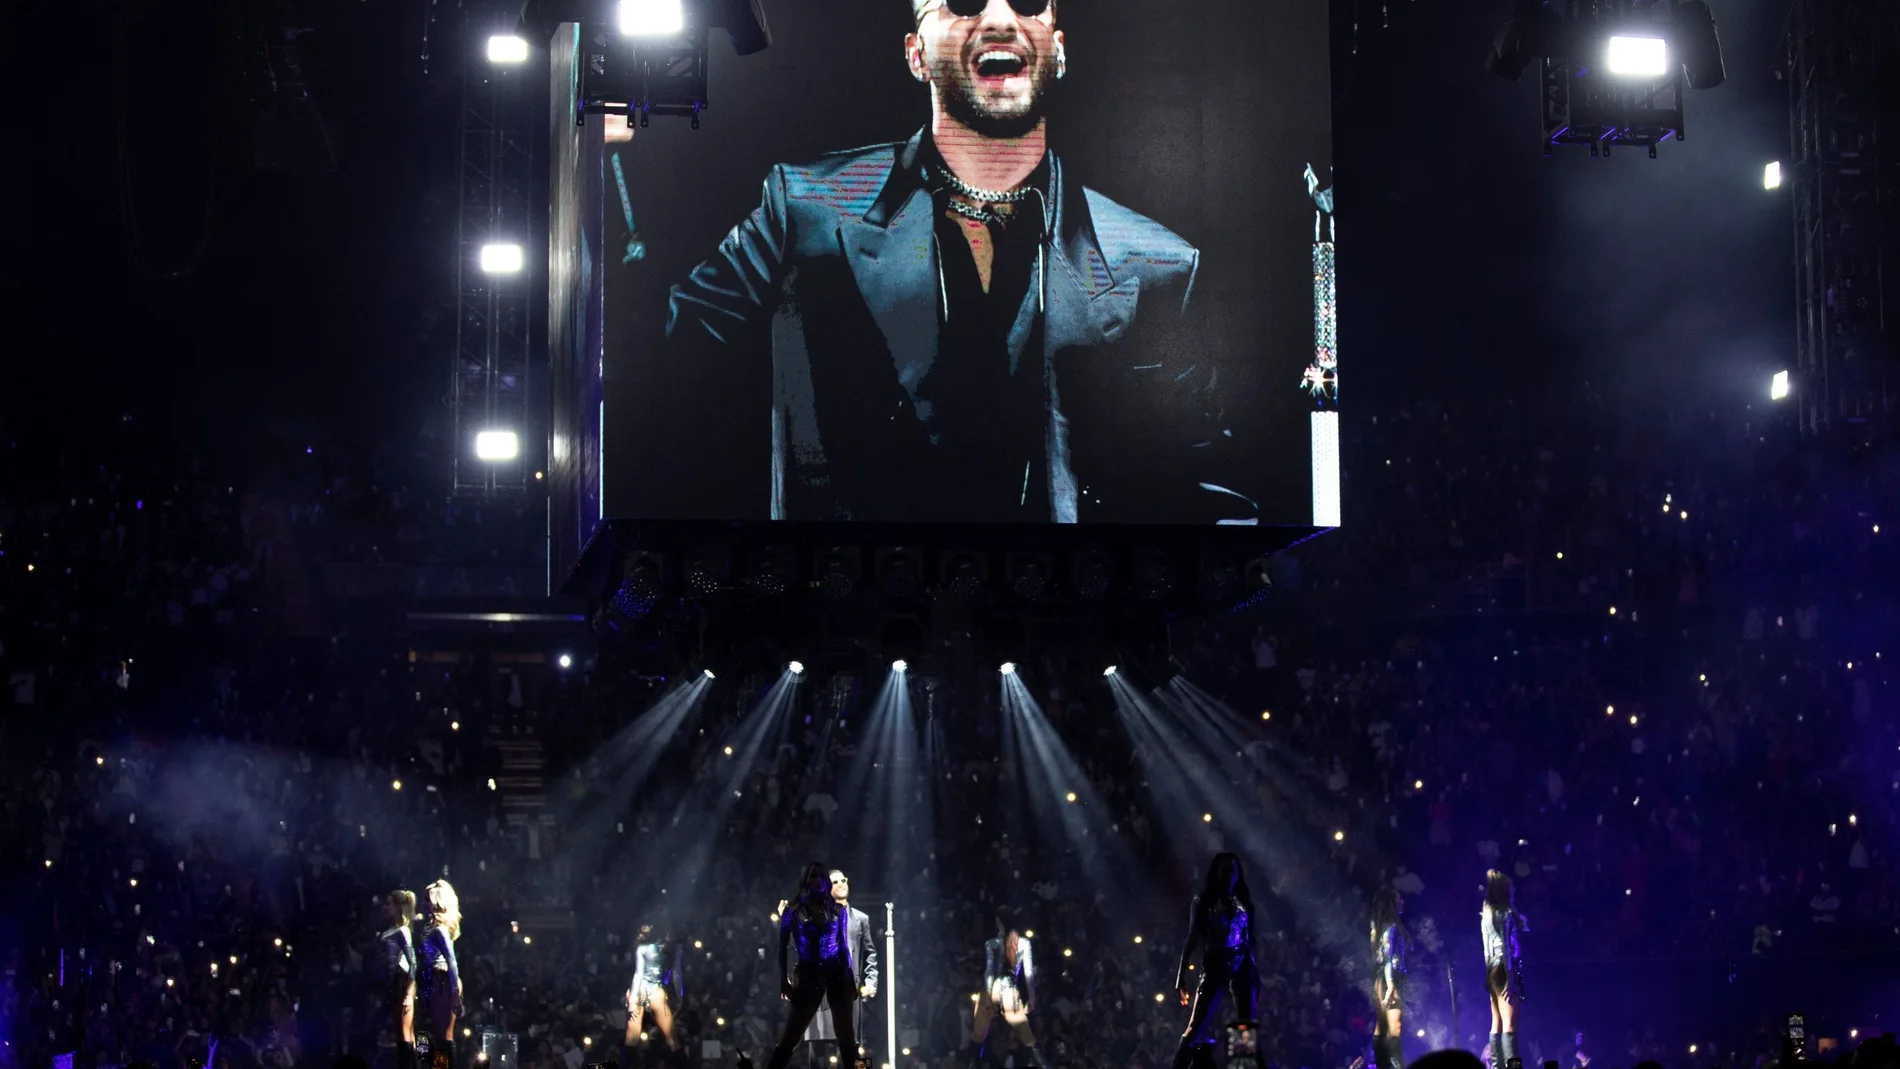 Inglewood (United States), 04/09/2021.- Colombian singer and songwriter Maluma performs on stage at the Forum arena in Inglewood, California, USA, 03 September 2021. The event is part of his Papi Juancho 2021 World Tour. 